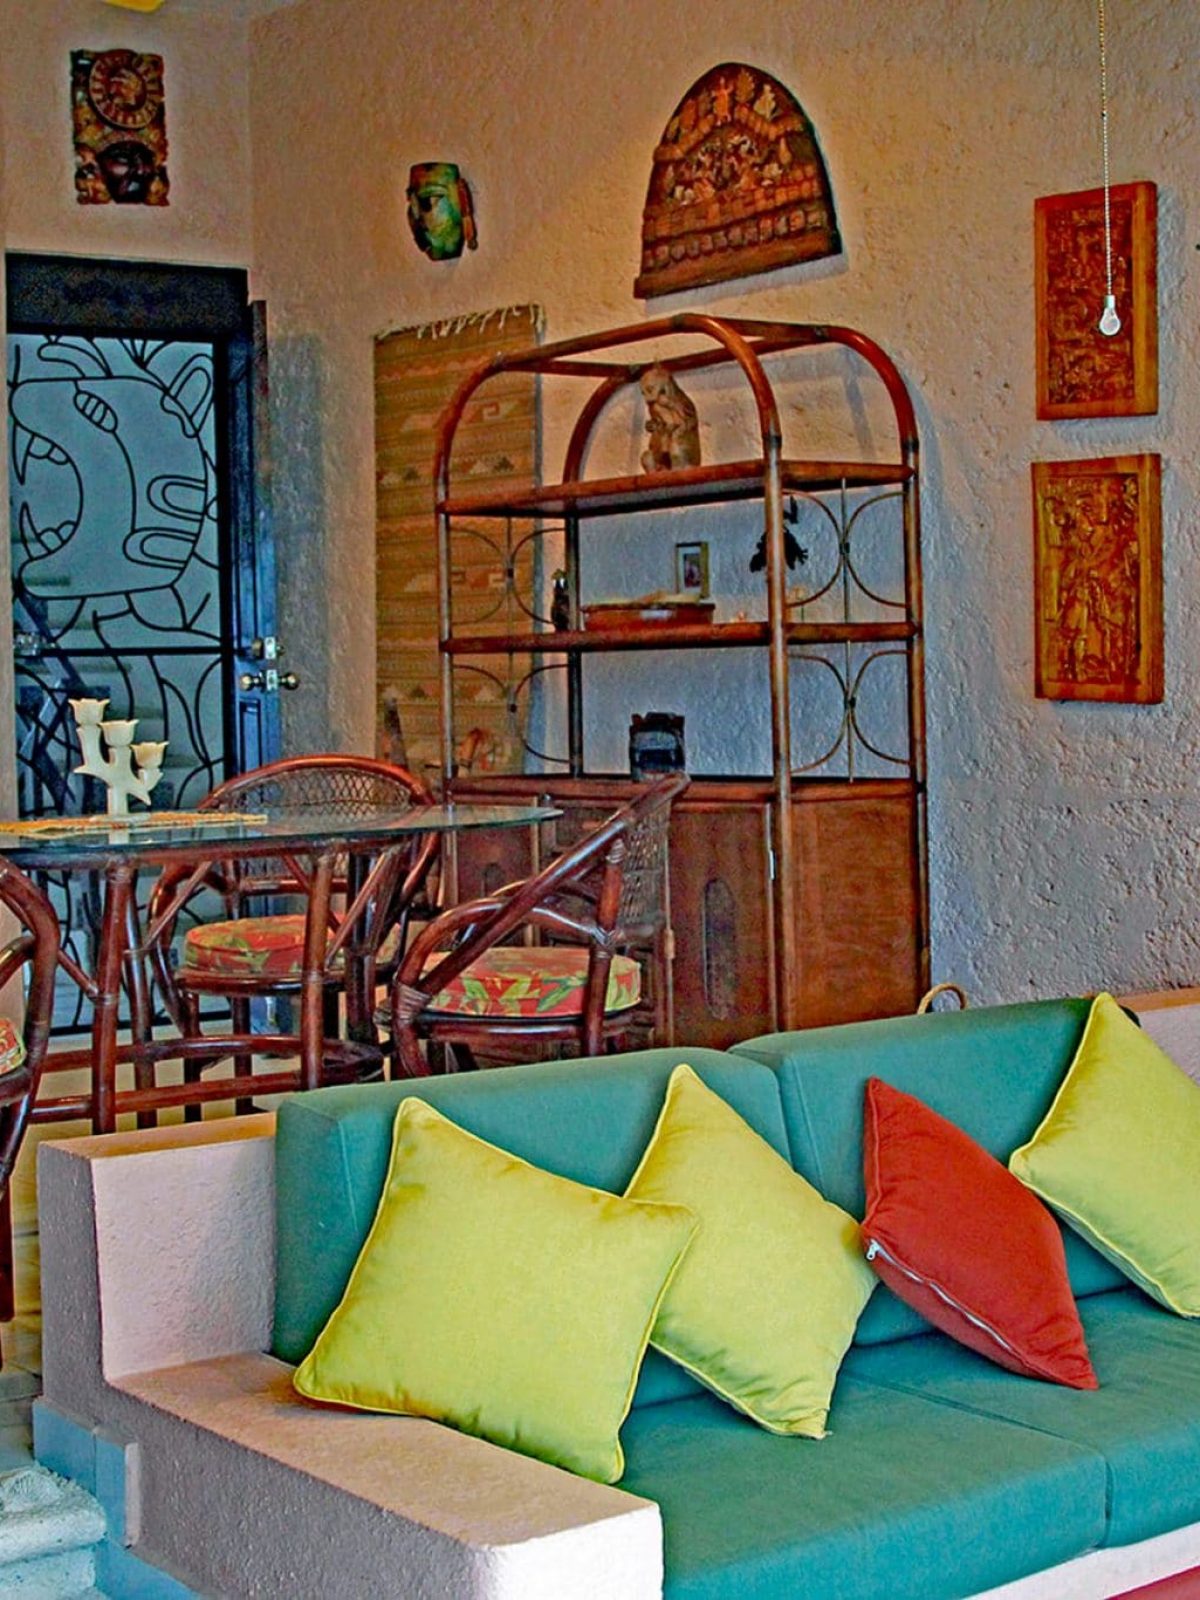 A View of La Sirena #5: Cen Balam's Open Plan Living and Dining Area with its Colorful Decor and Gorgeous Mexicans Craftmanship